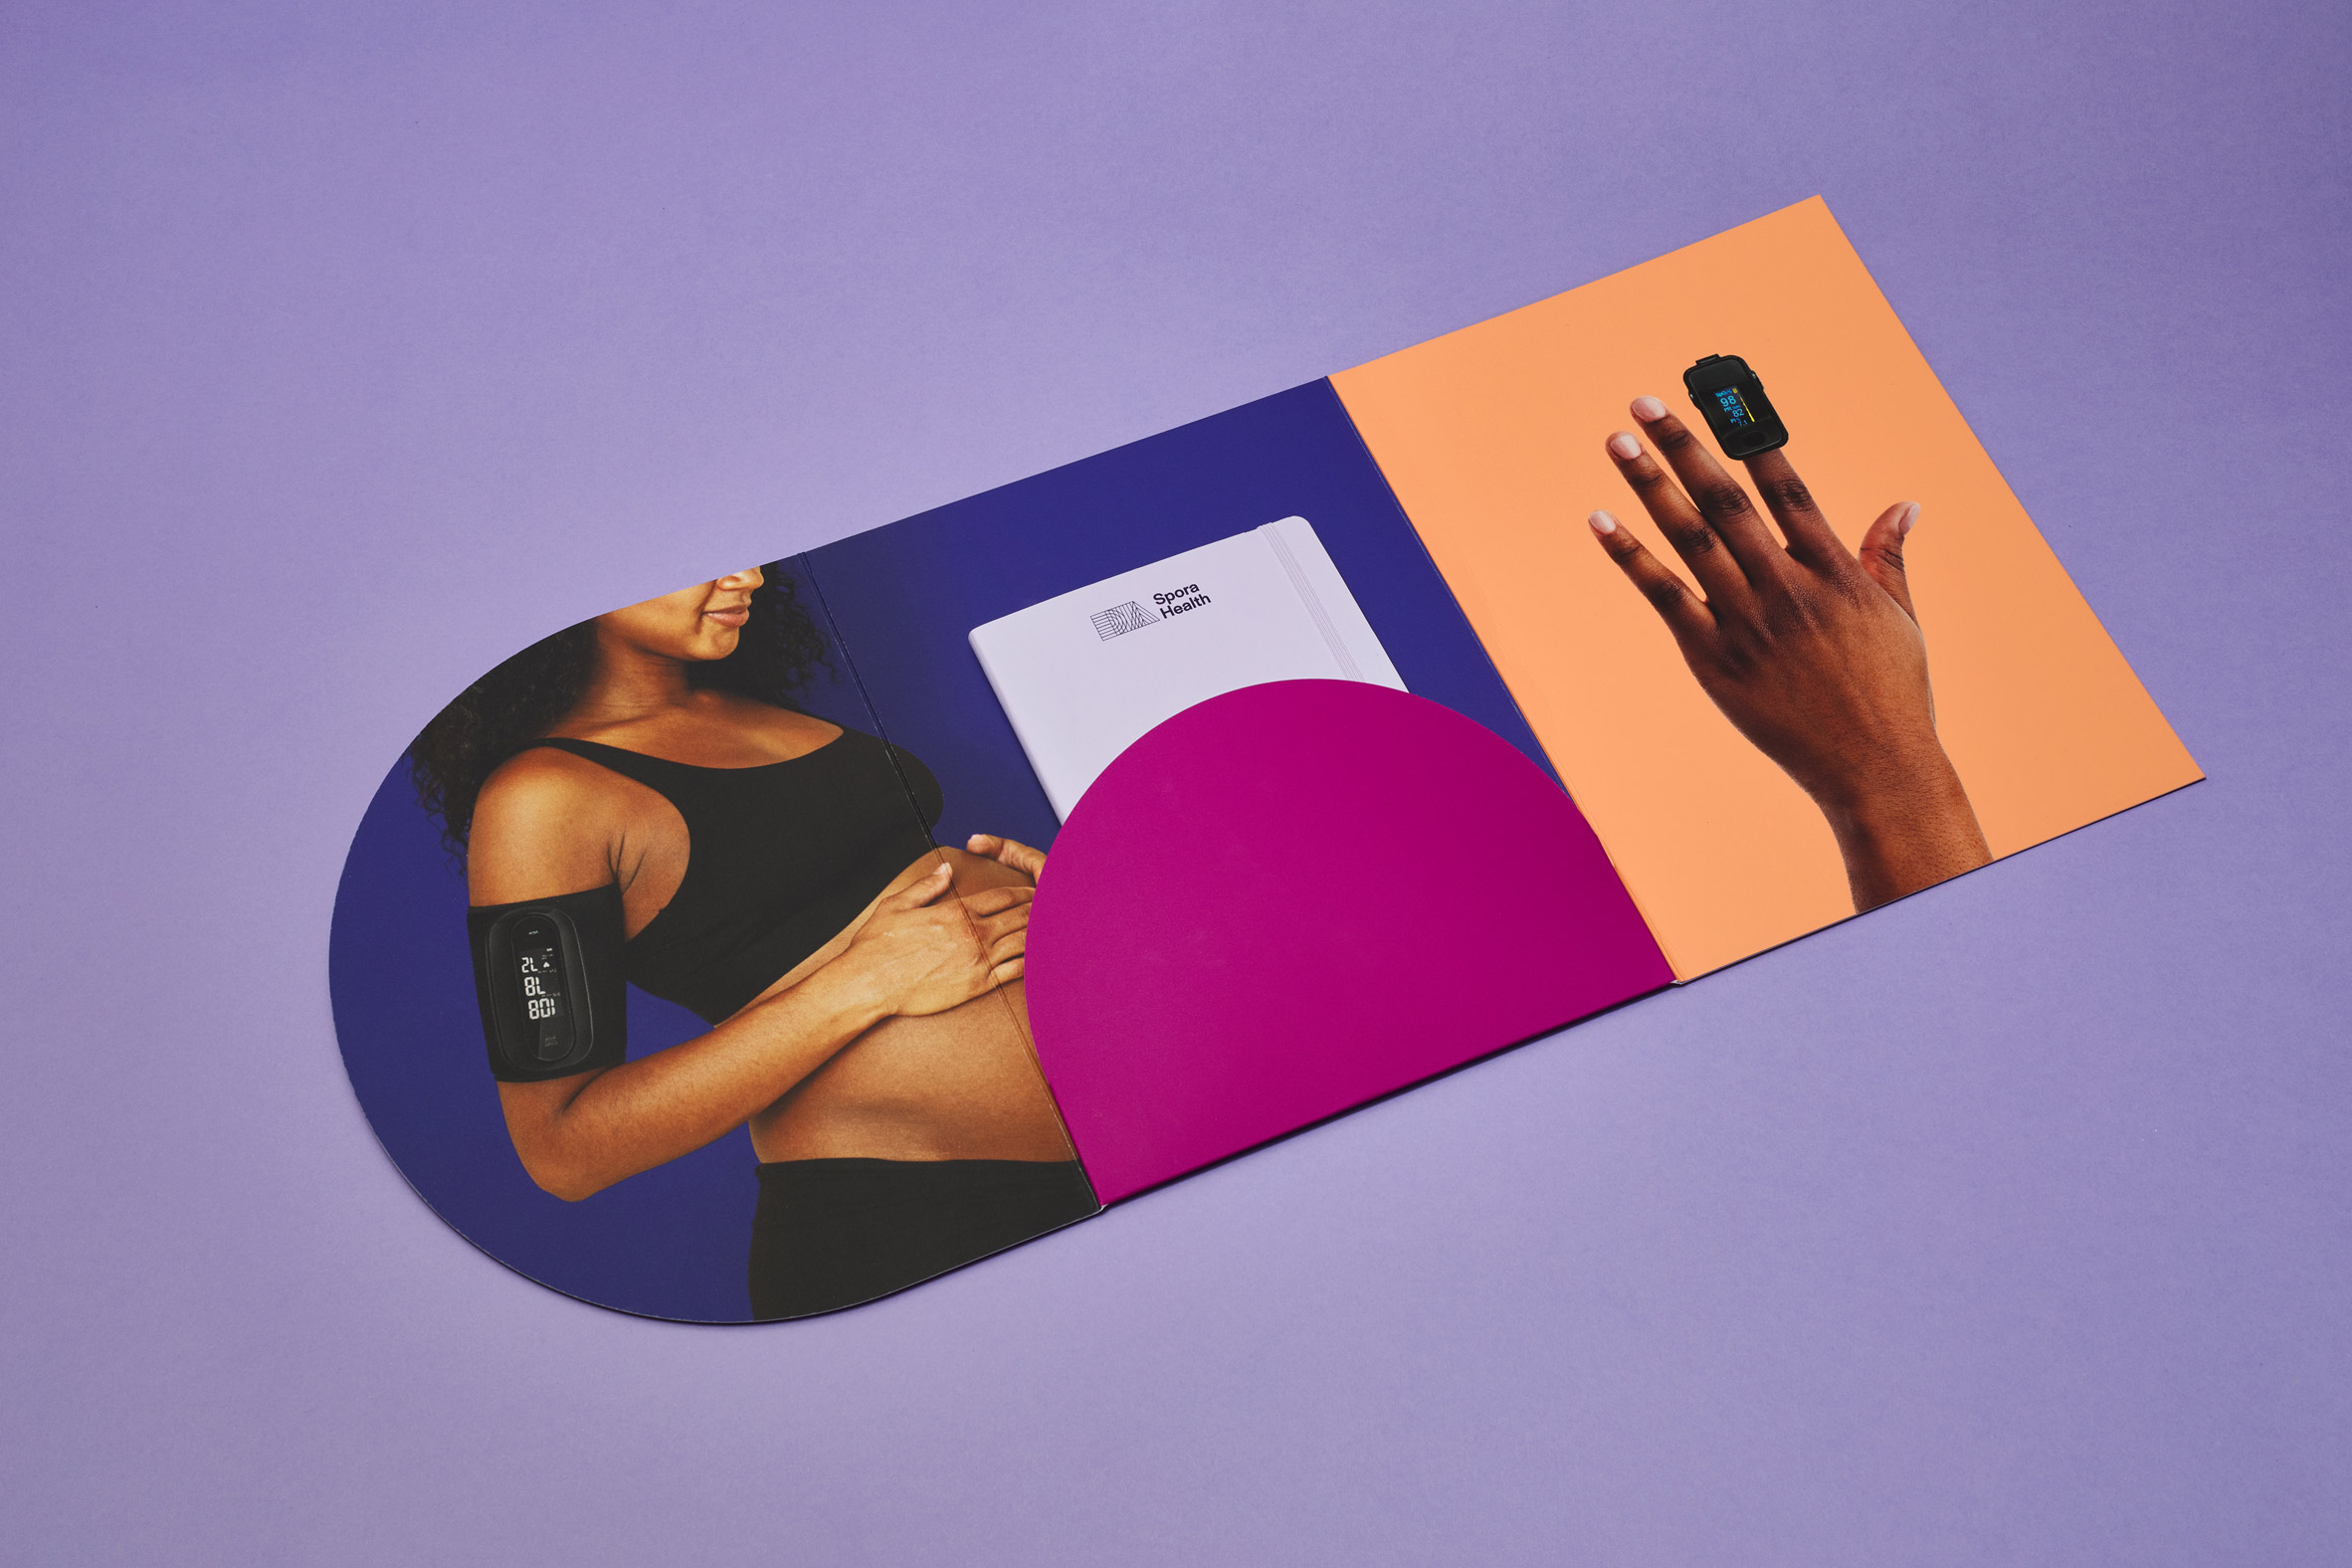 Photo of an instruction card from the Momma's Kit with a full-page colour photo of a Black pregnant woman on the left and a close-up of a hand with a pulse oximeter place on the end of the index finger on the right